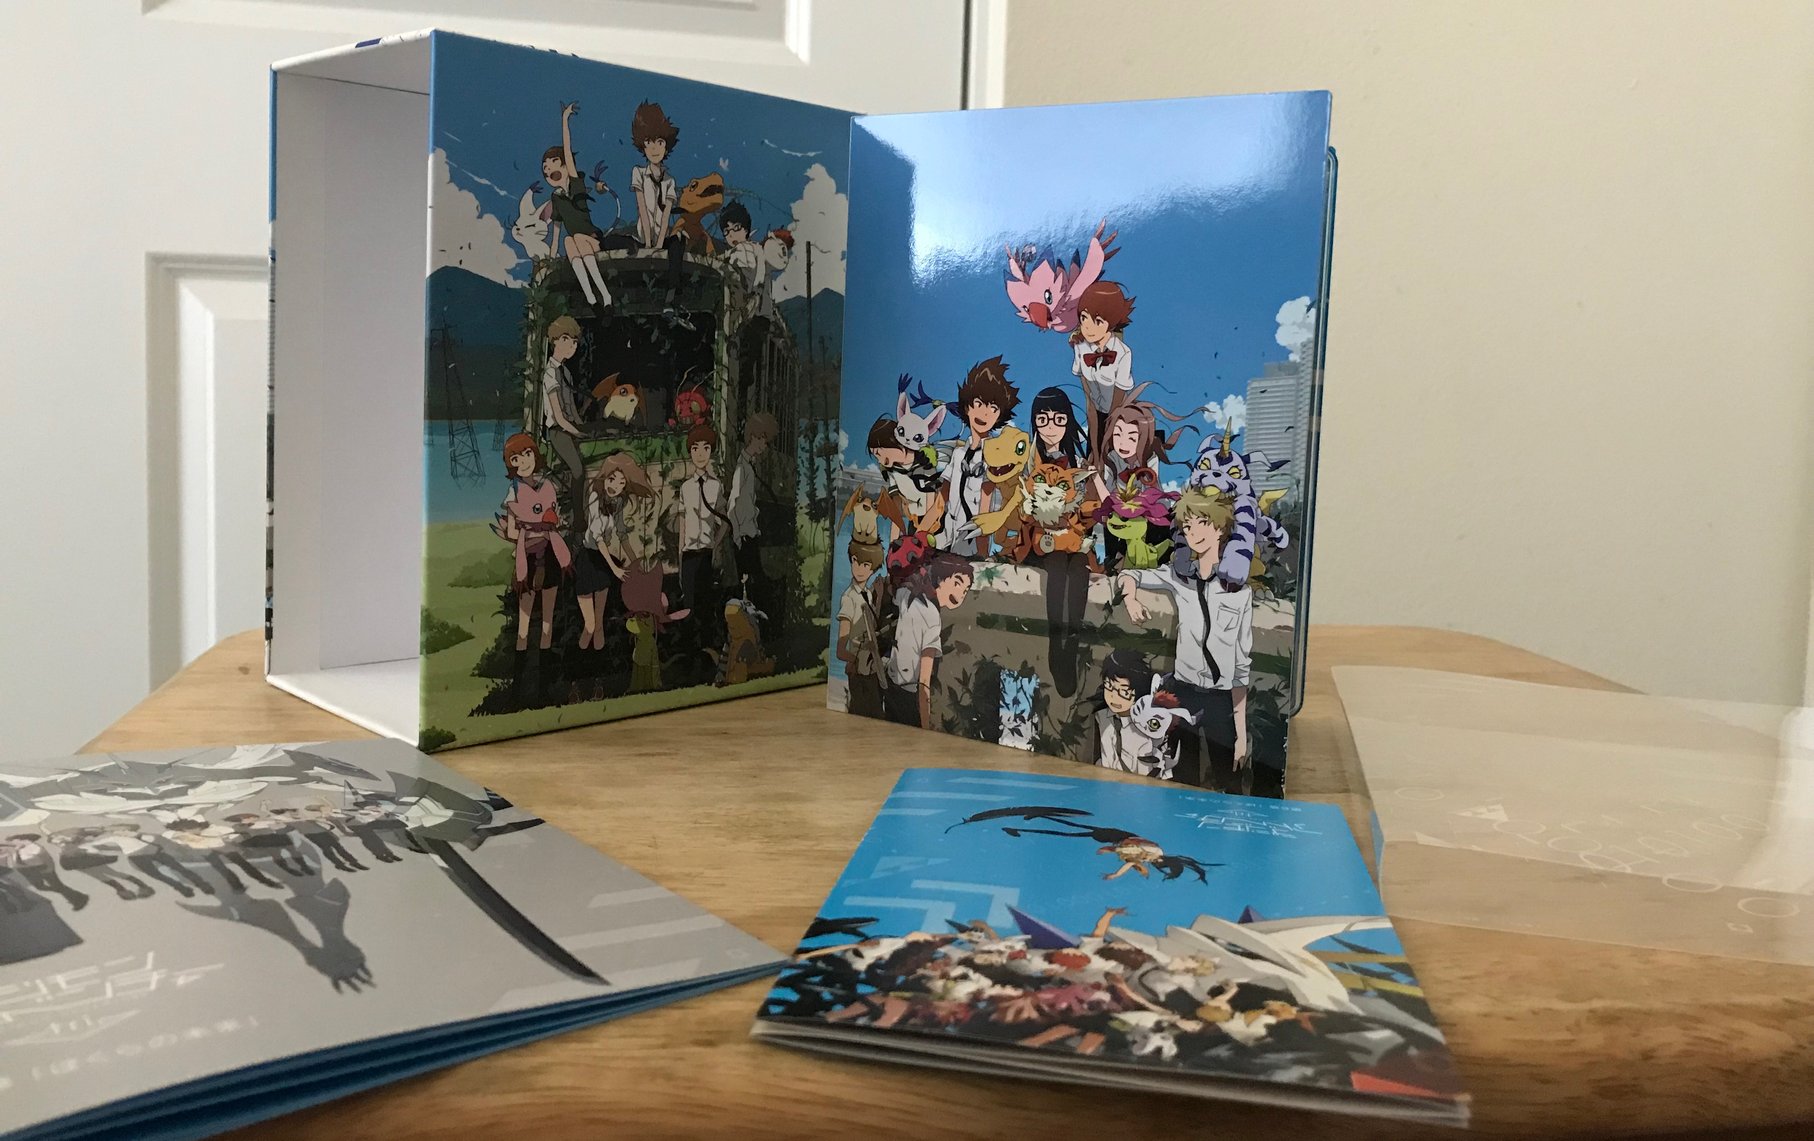 UK tri. Part 5 Blu-ray Collector's Edition Release- Scans, Breakdown, and  Overview